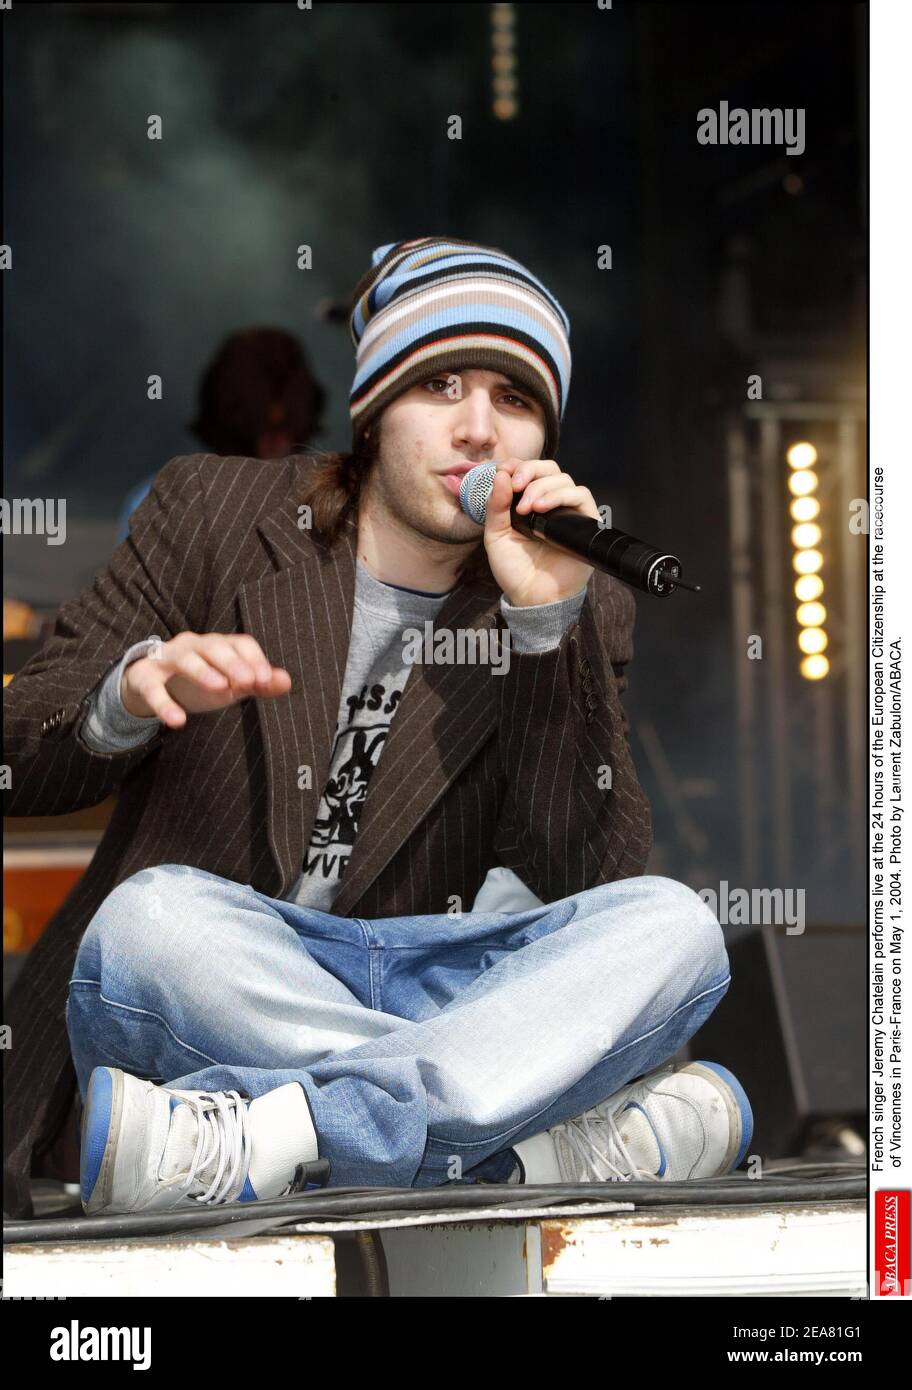 French singer Jeremy Chatelain performs live at the 24 hours of the European Citizenship at the racecourse of Vincennes in Paris-France on May 1, 2004. Photo by Laurent Zabulon/ABACA. Stock Photo